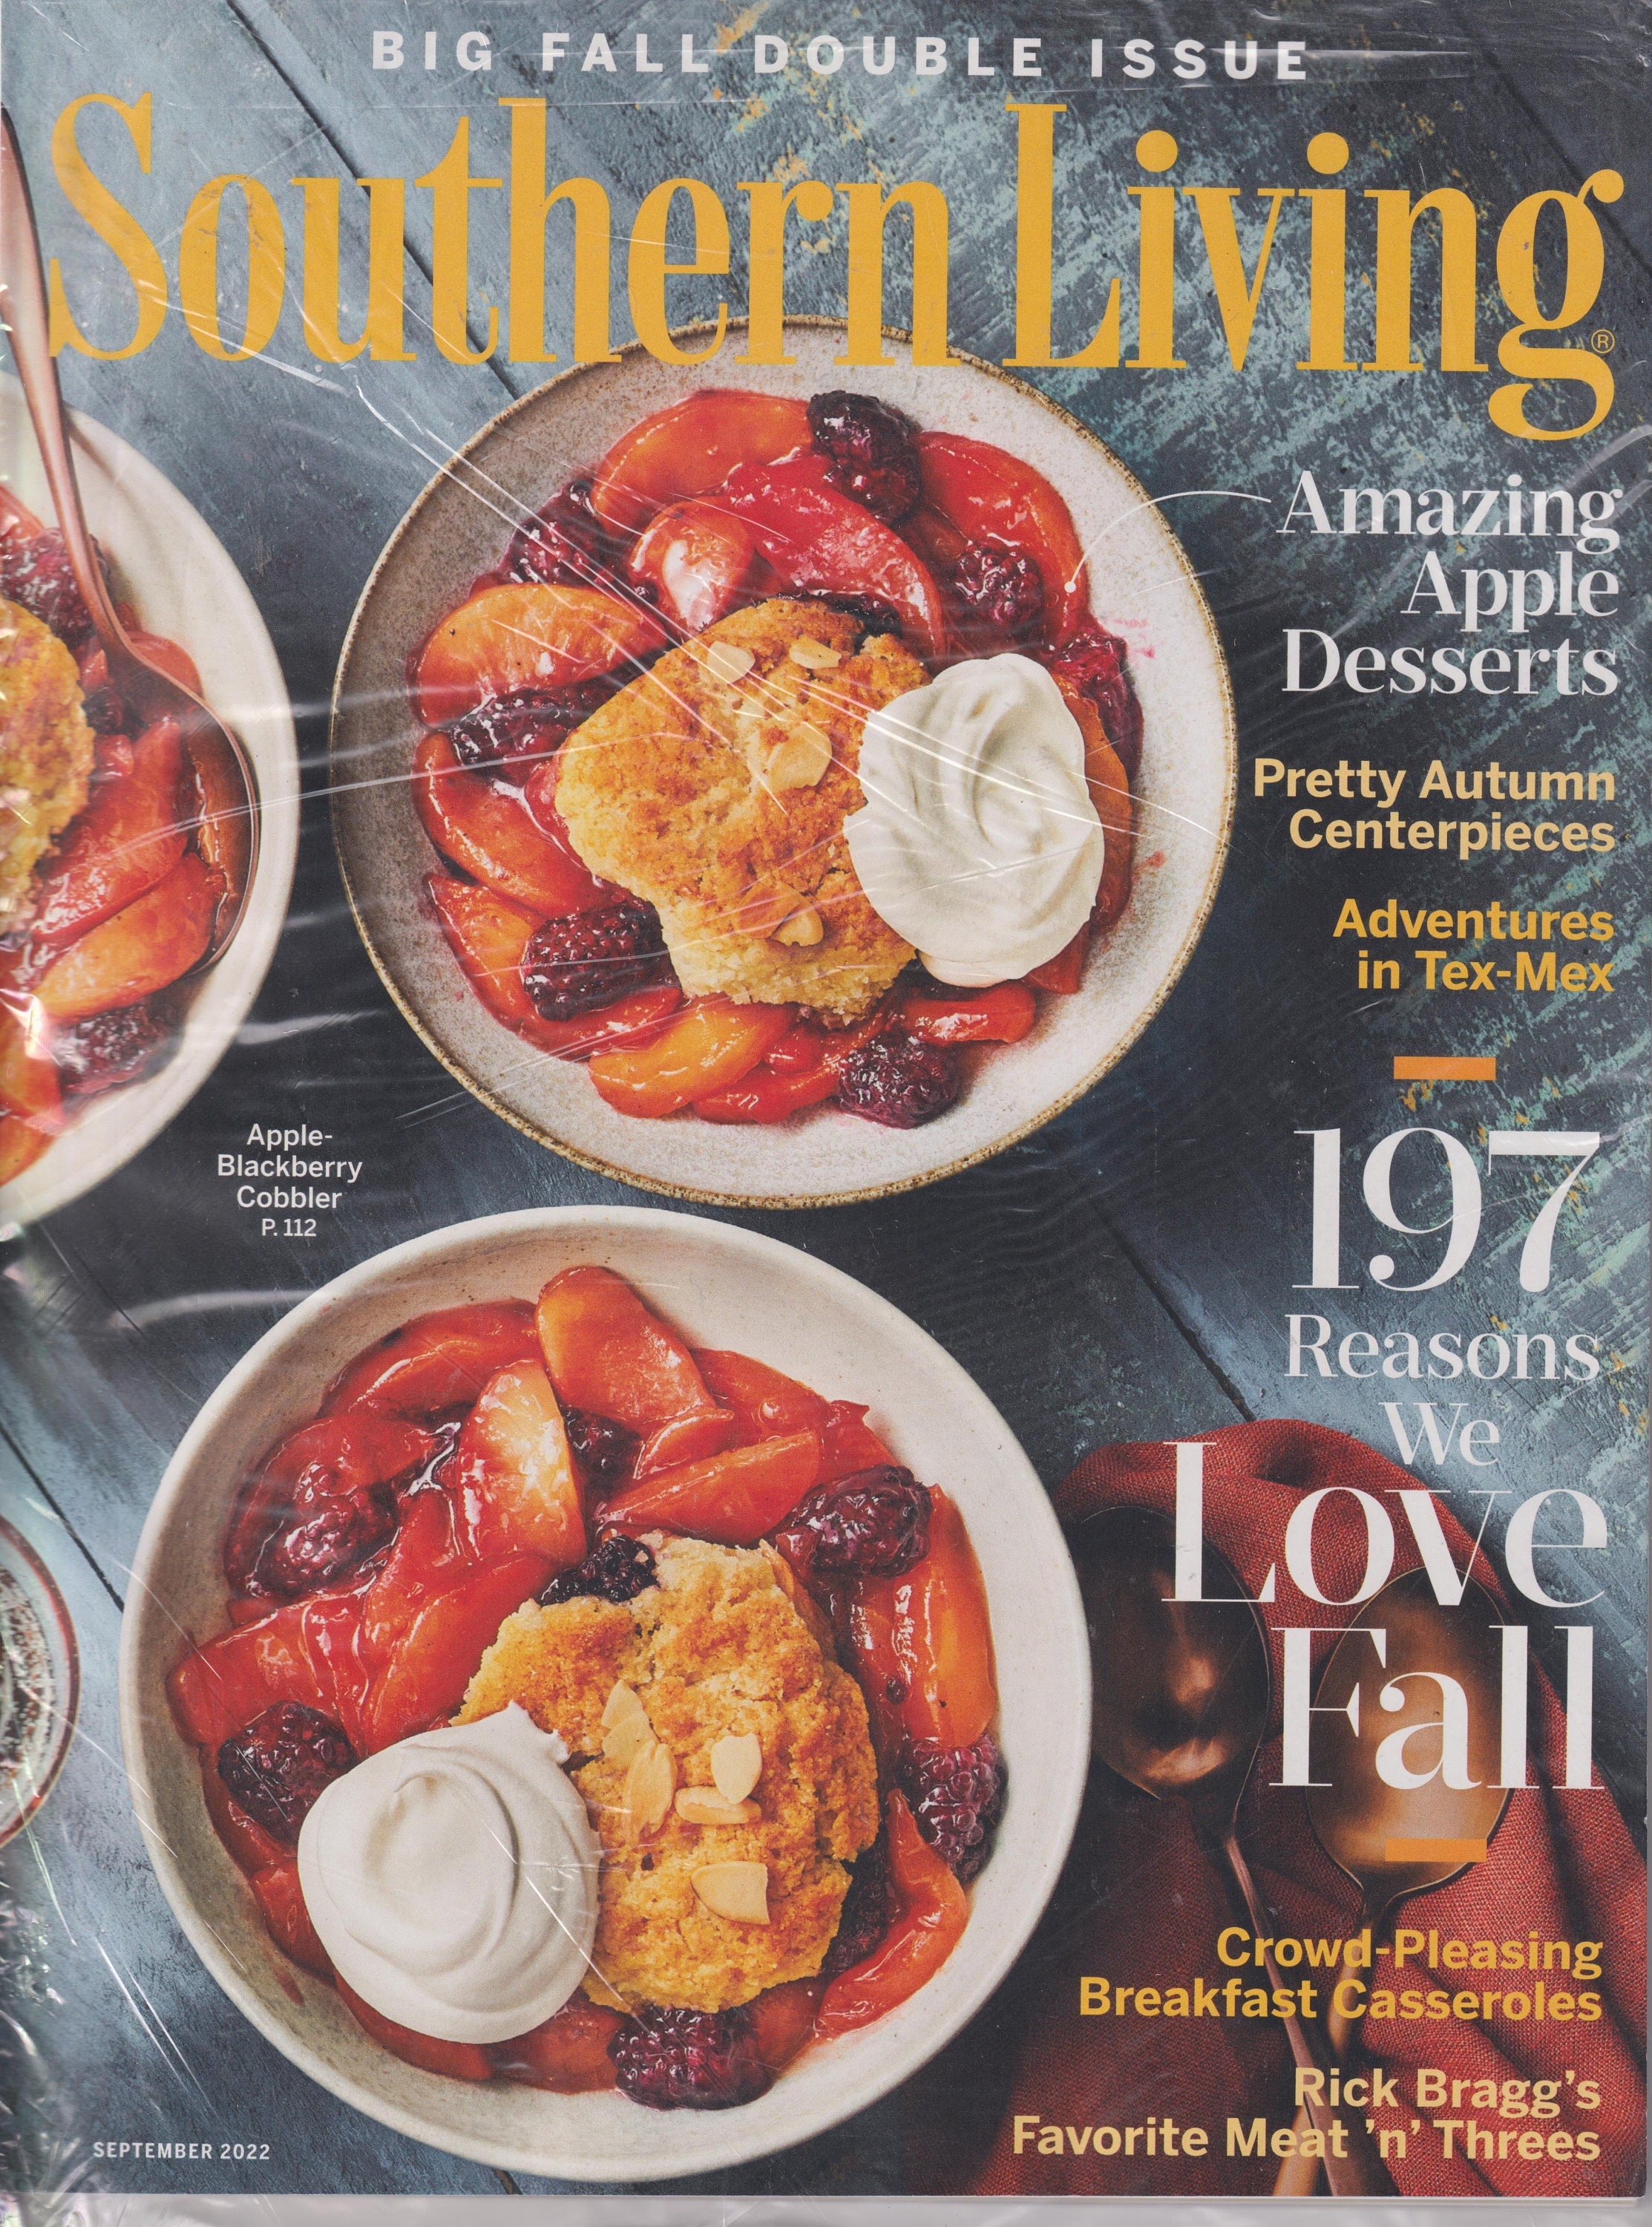 Southern Living September 2022 Big Fall Double Issue 197 Reasons We